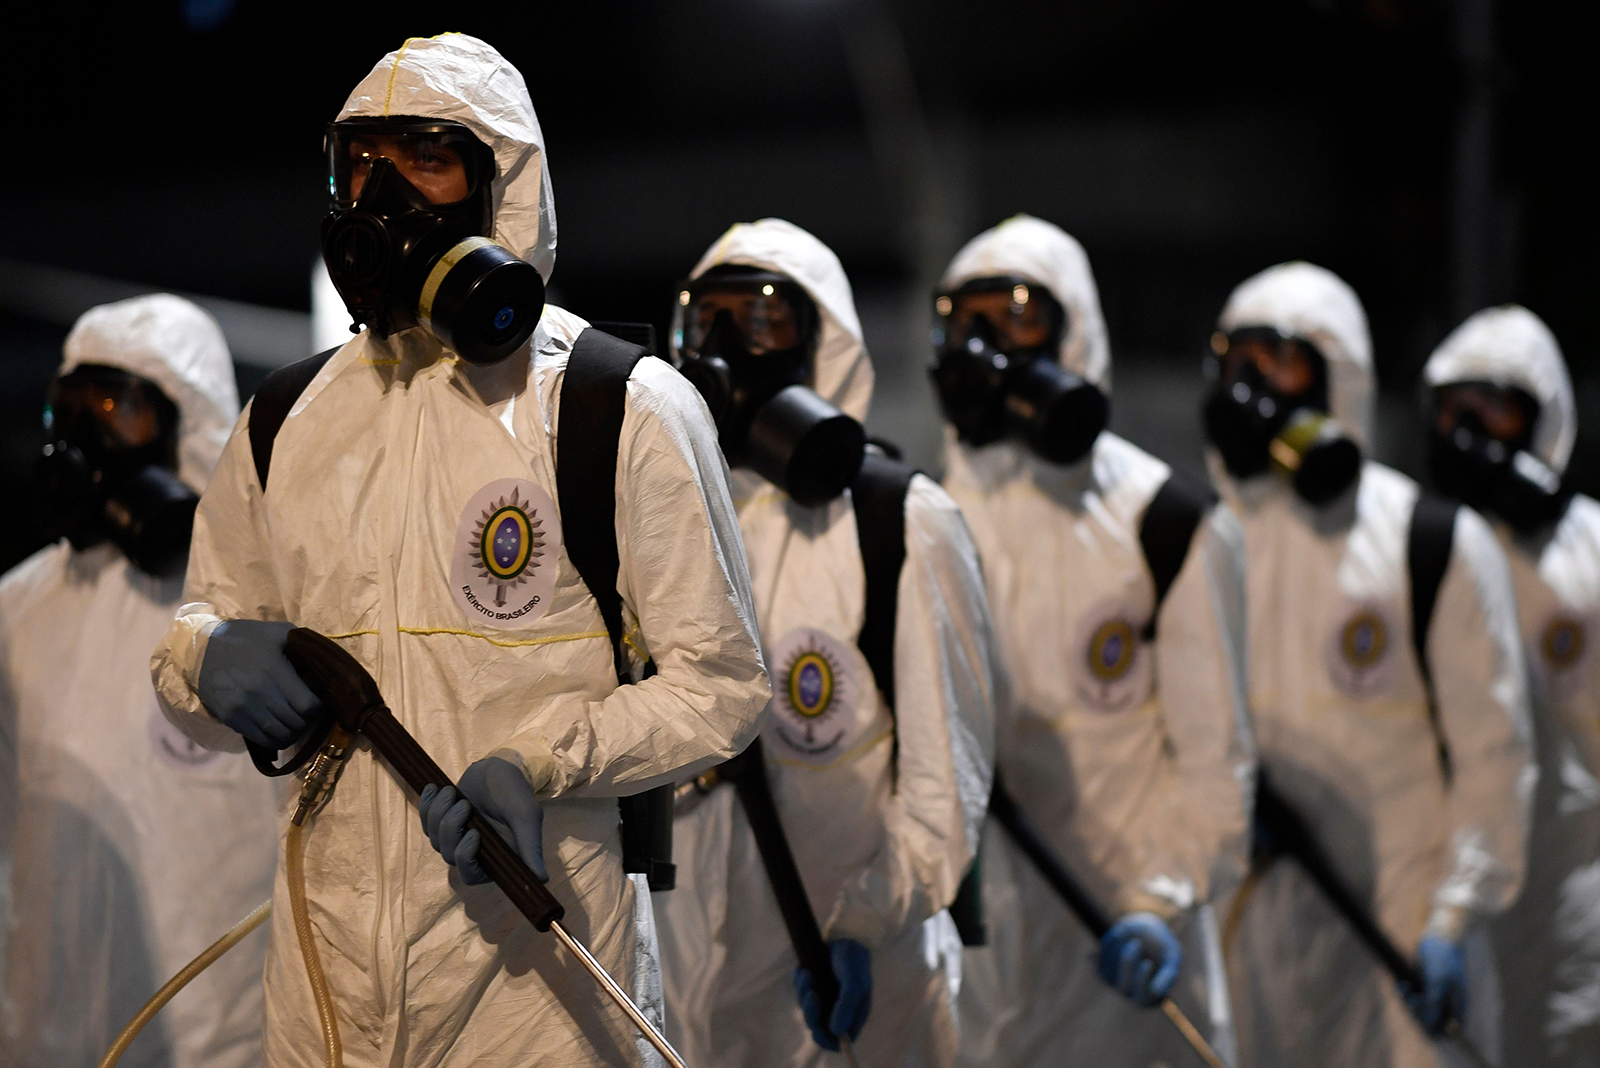 Soldiers from the 4th Military Region of the Brazilian Armed Forces take part in the cleaning and disinfection of the Municipal Market in the Belo Horizonte, Brazil on August 18. 